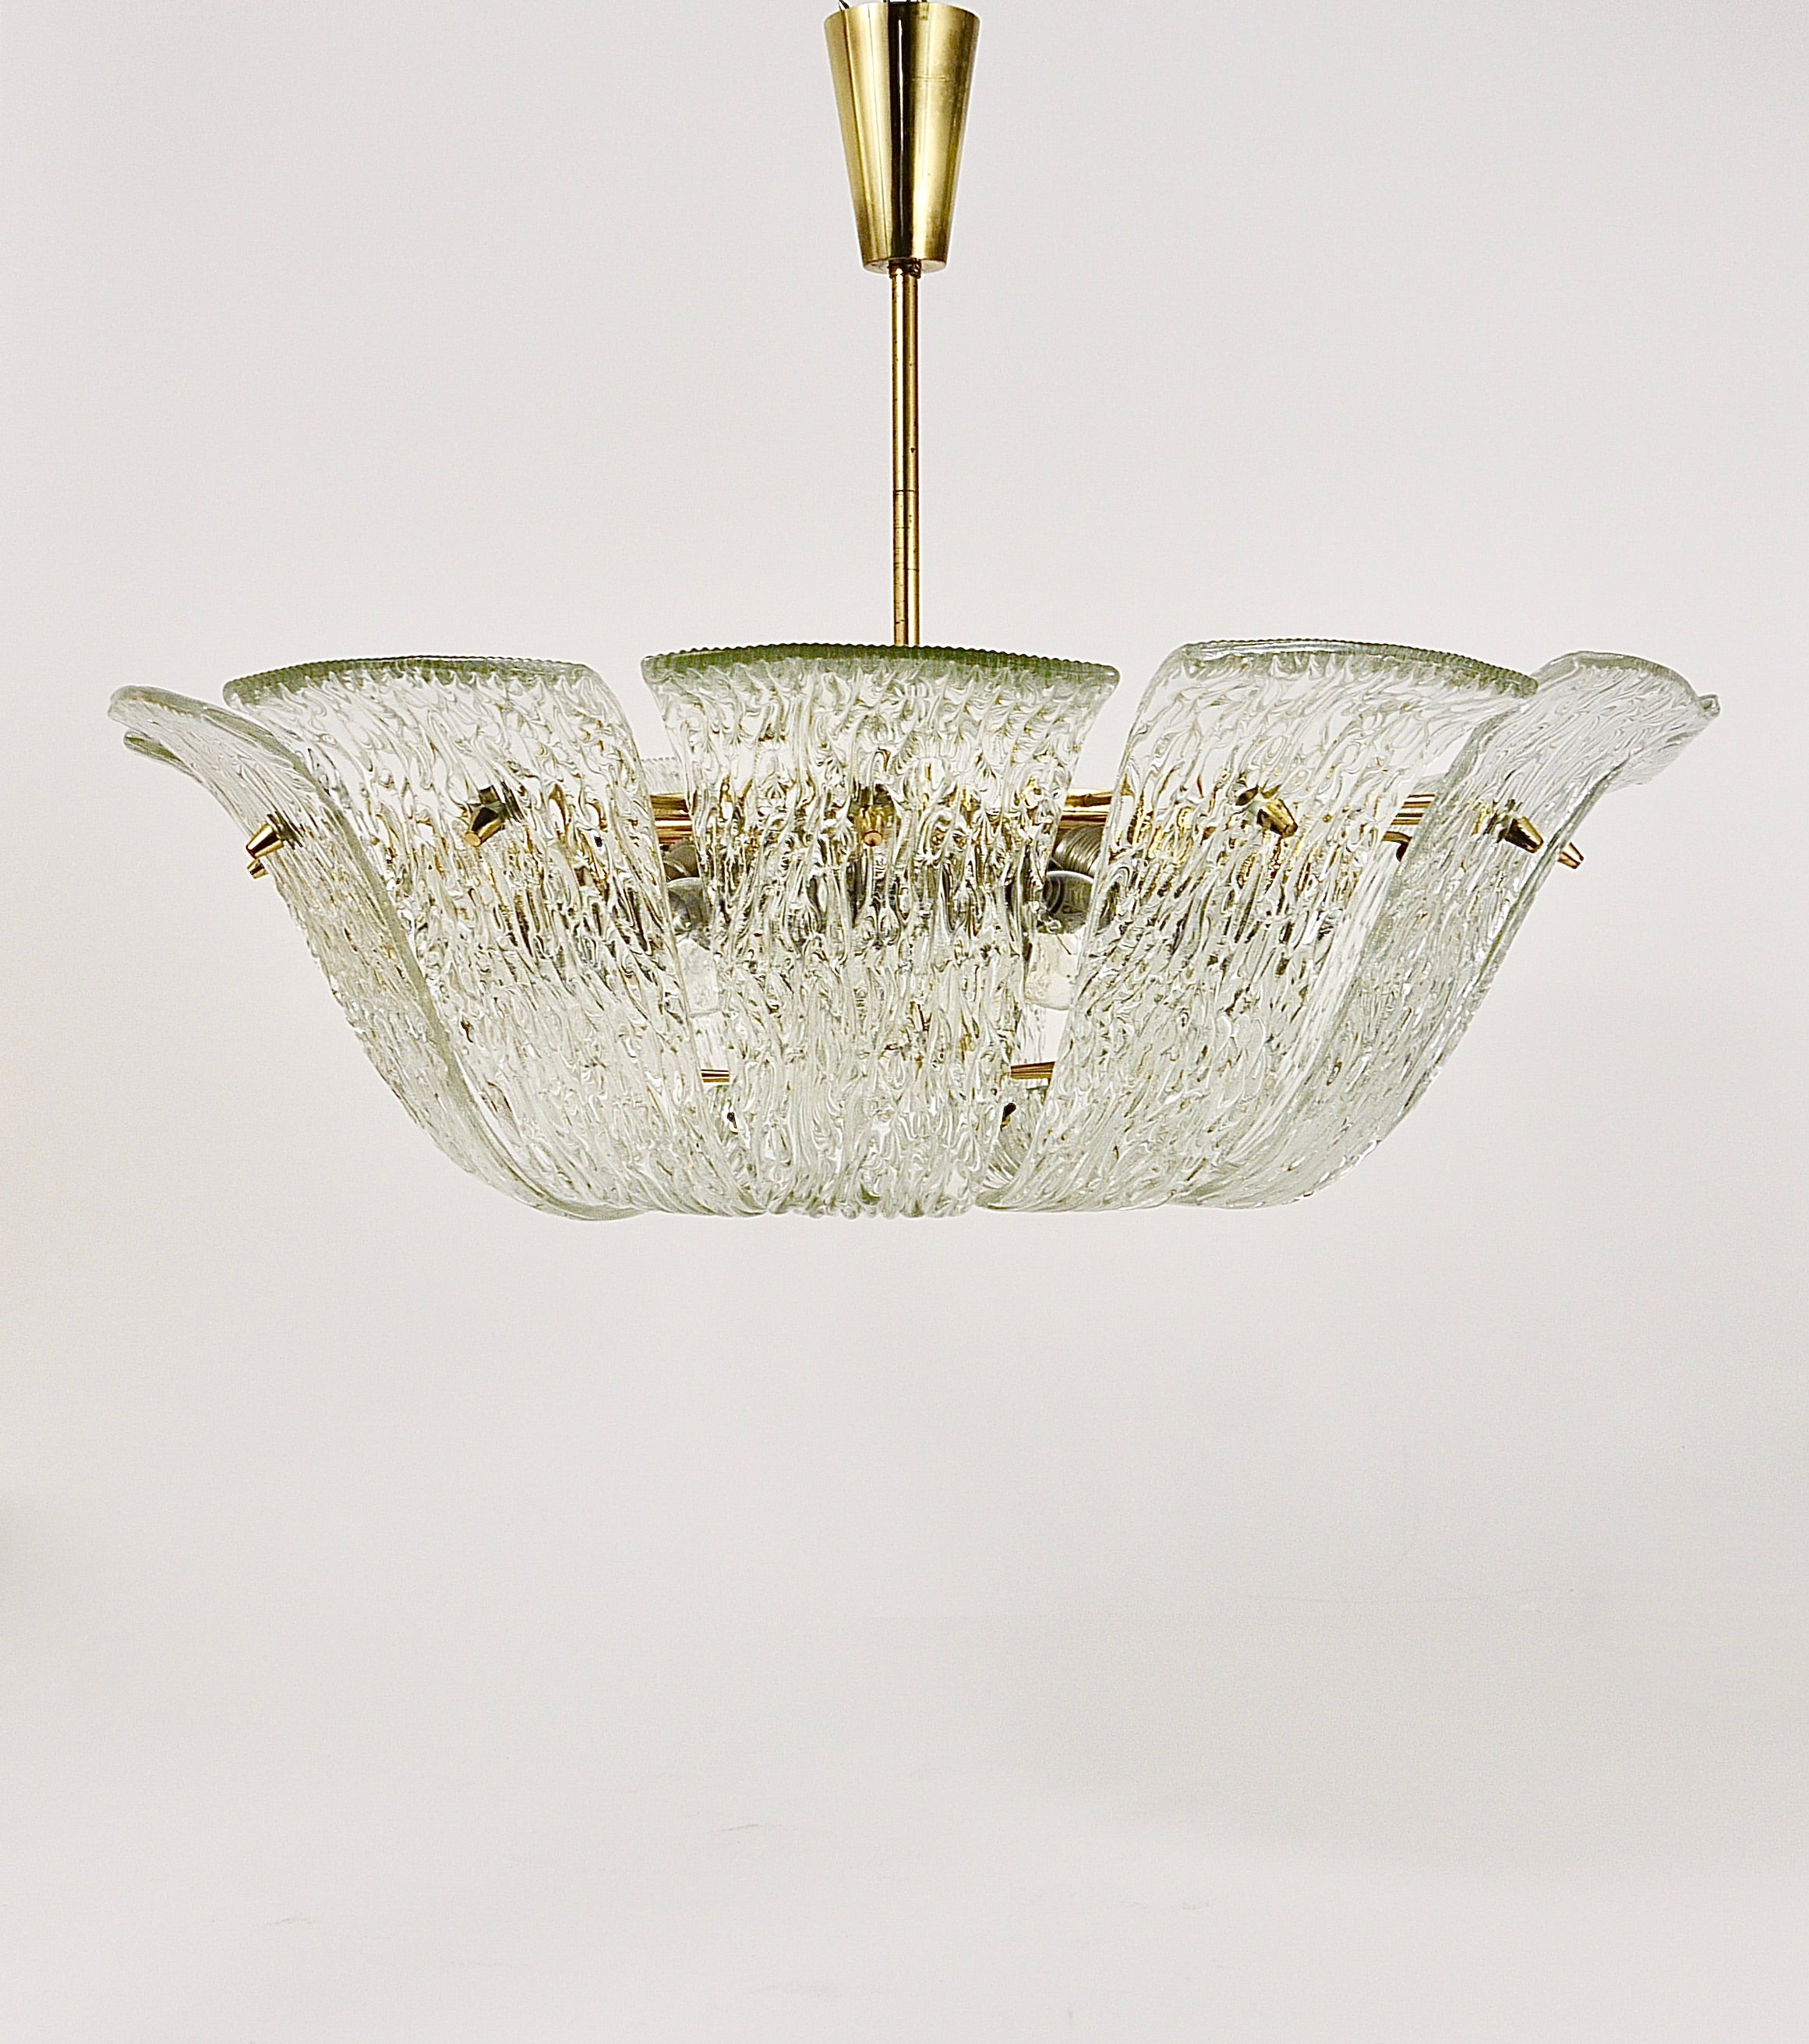 A very beautiful and large 29 inches diameter Austrian modernist brass chandelier from the 1950s, manufactured by J.T. Kalmar Vienna. This charming and elegant vintage chandelier has 12 pieces of lovely curved textured clear glasses, which remind of